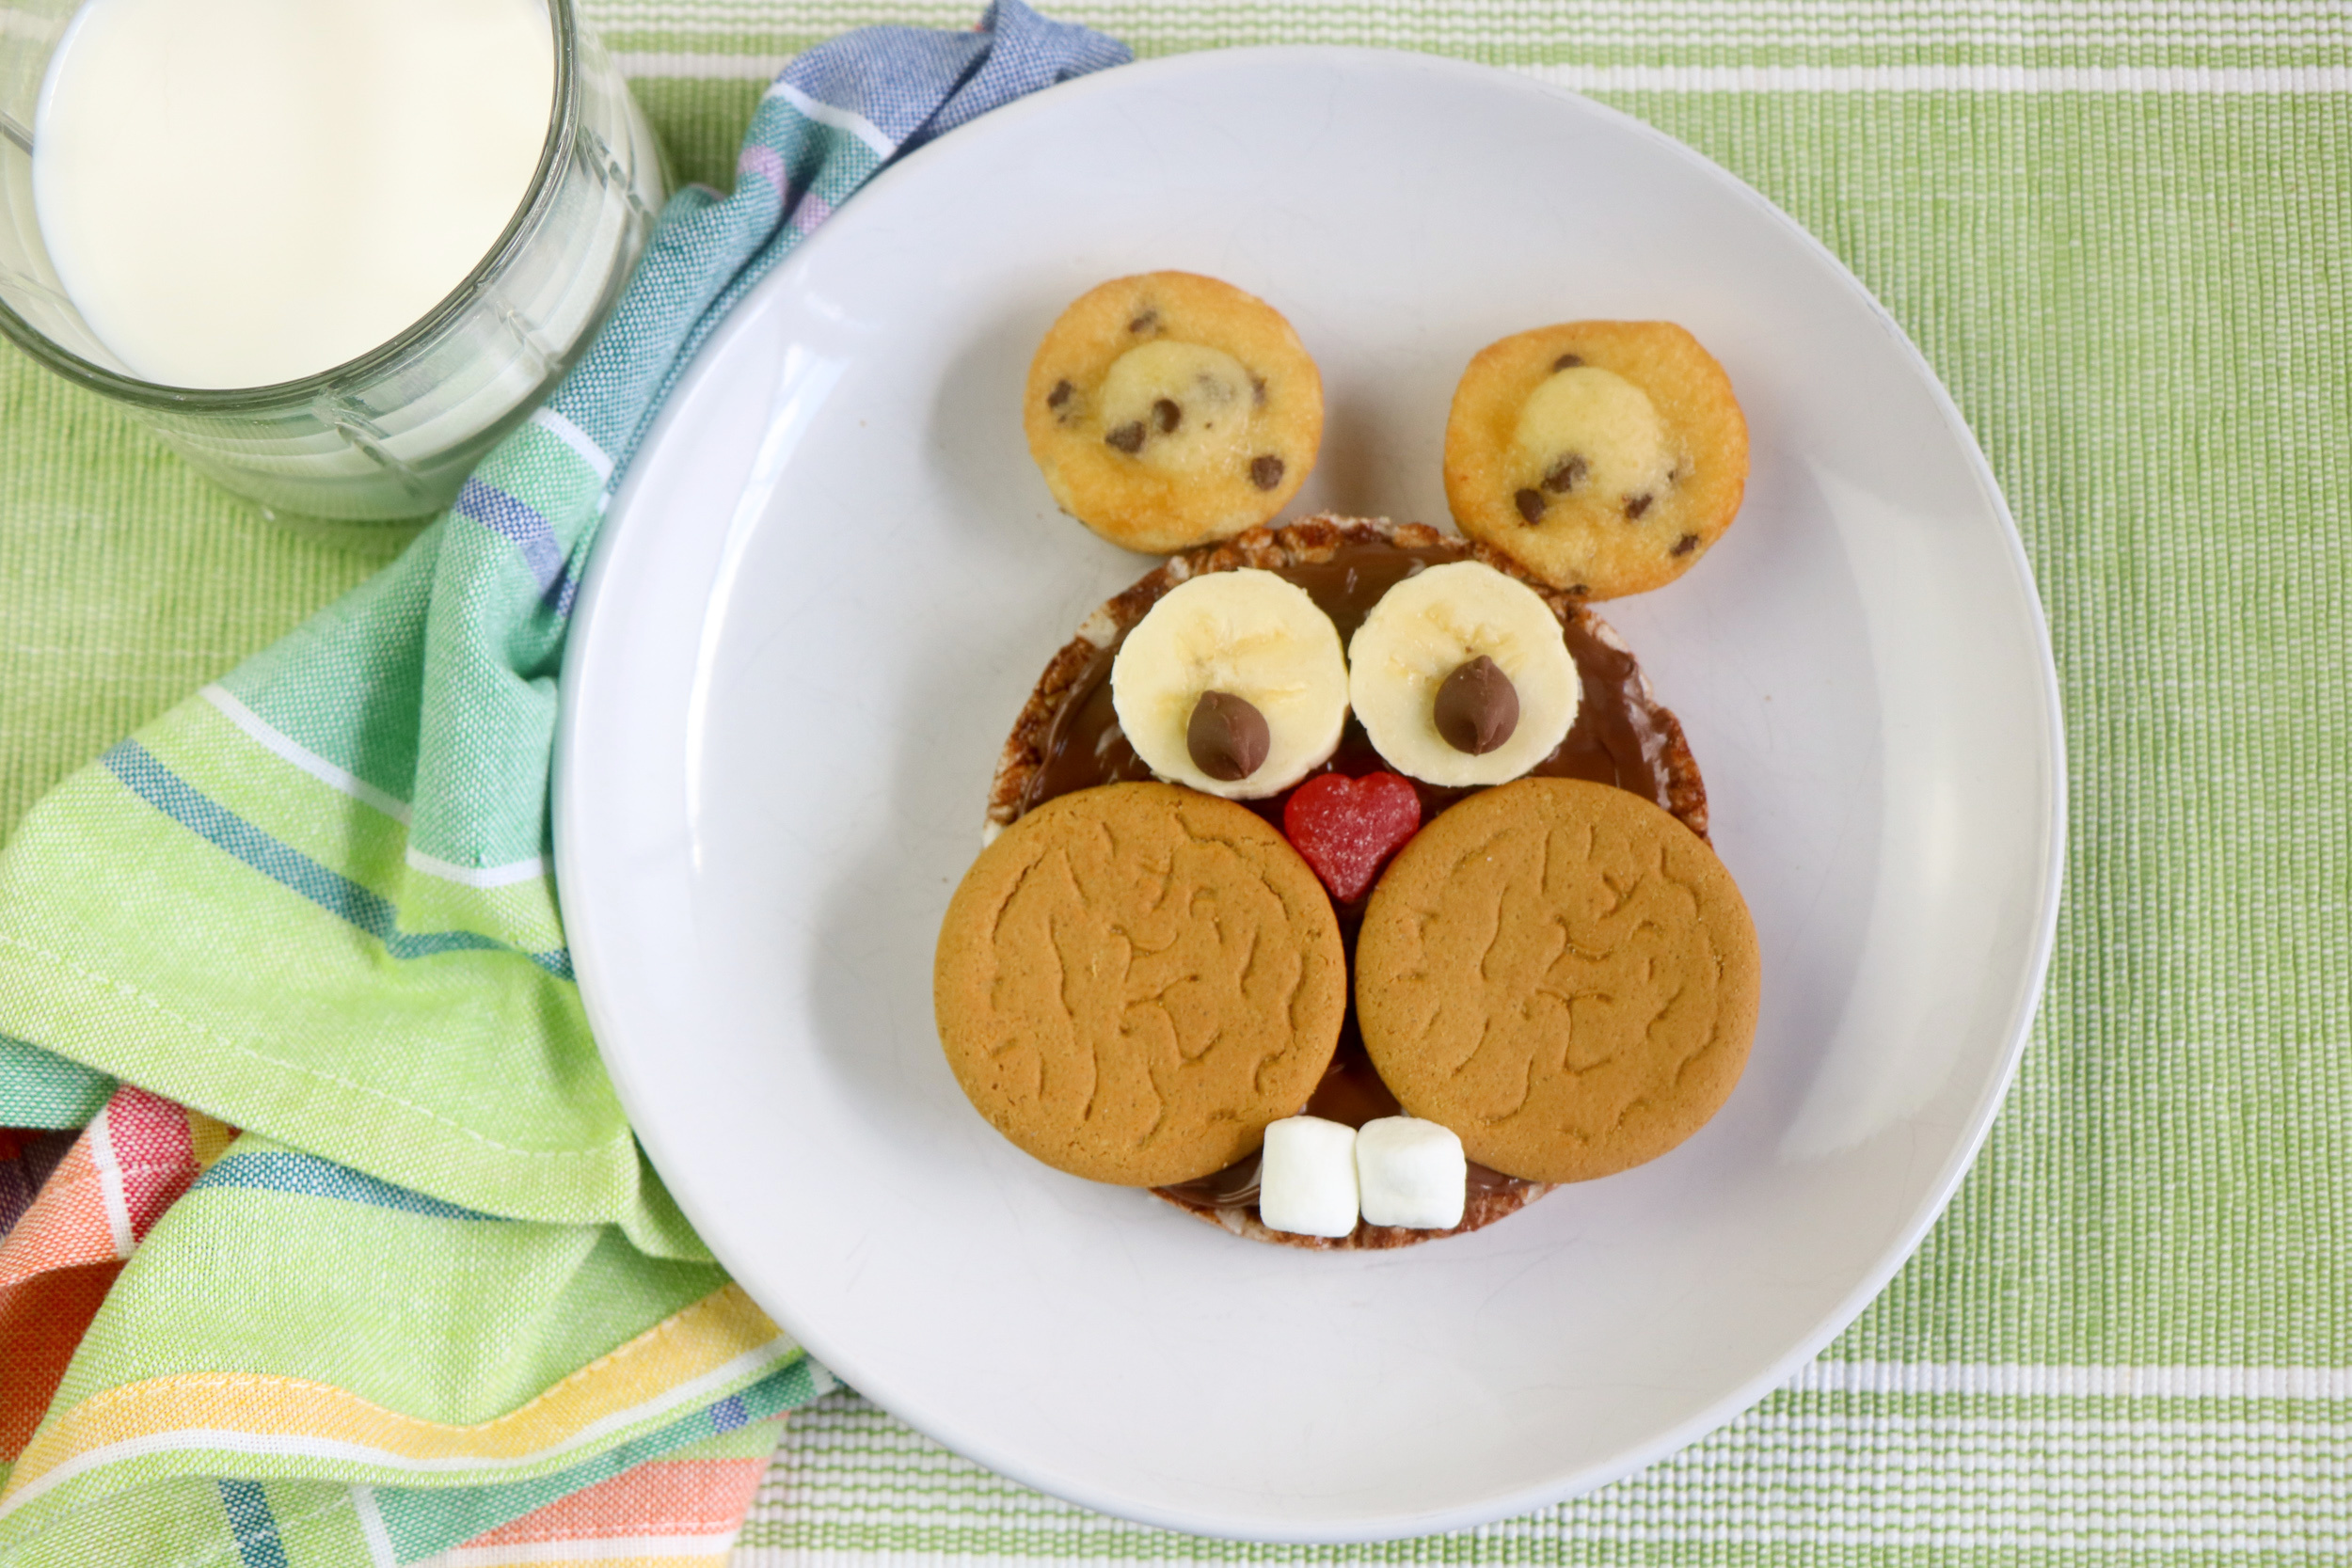 Add the bananas and chocolate chips for the two little eyes. Then, just place the mini muffins on top as the ears! EASY! 